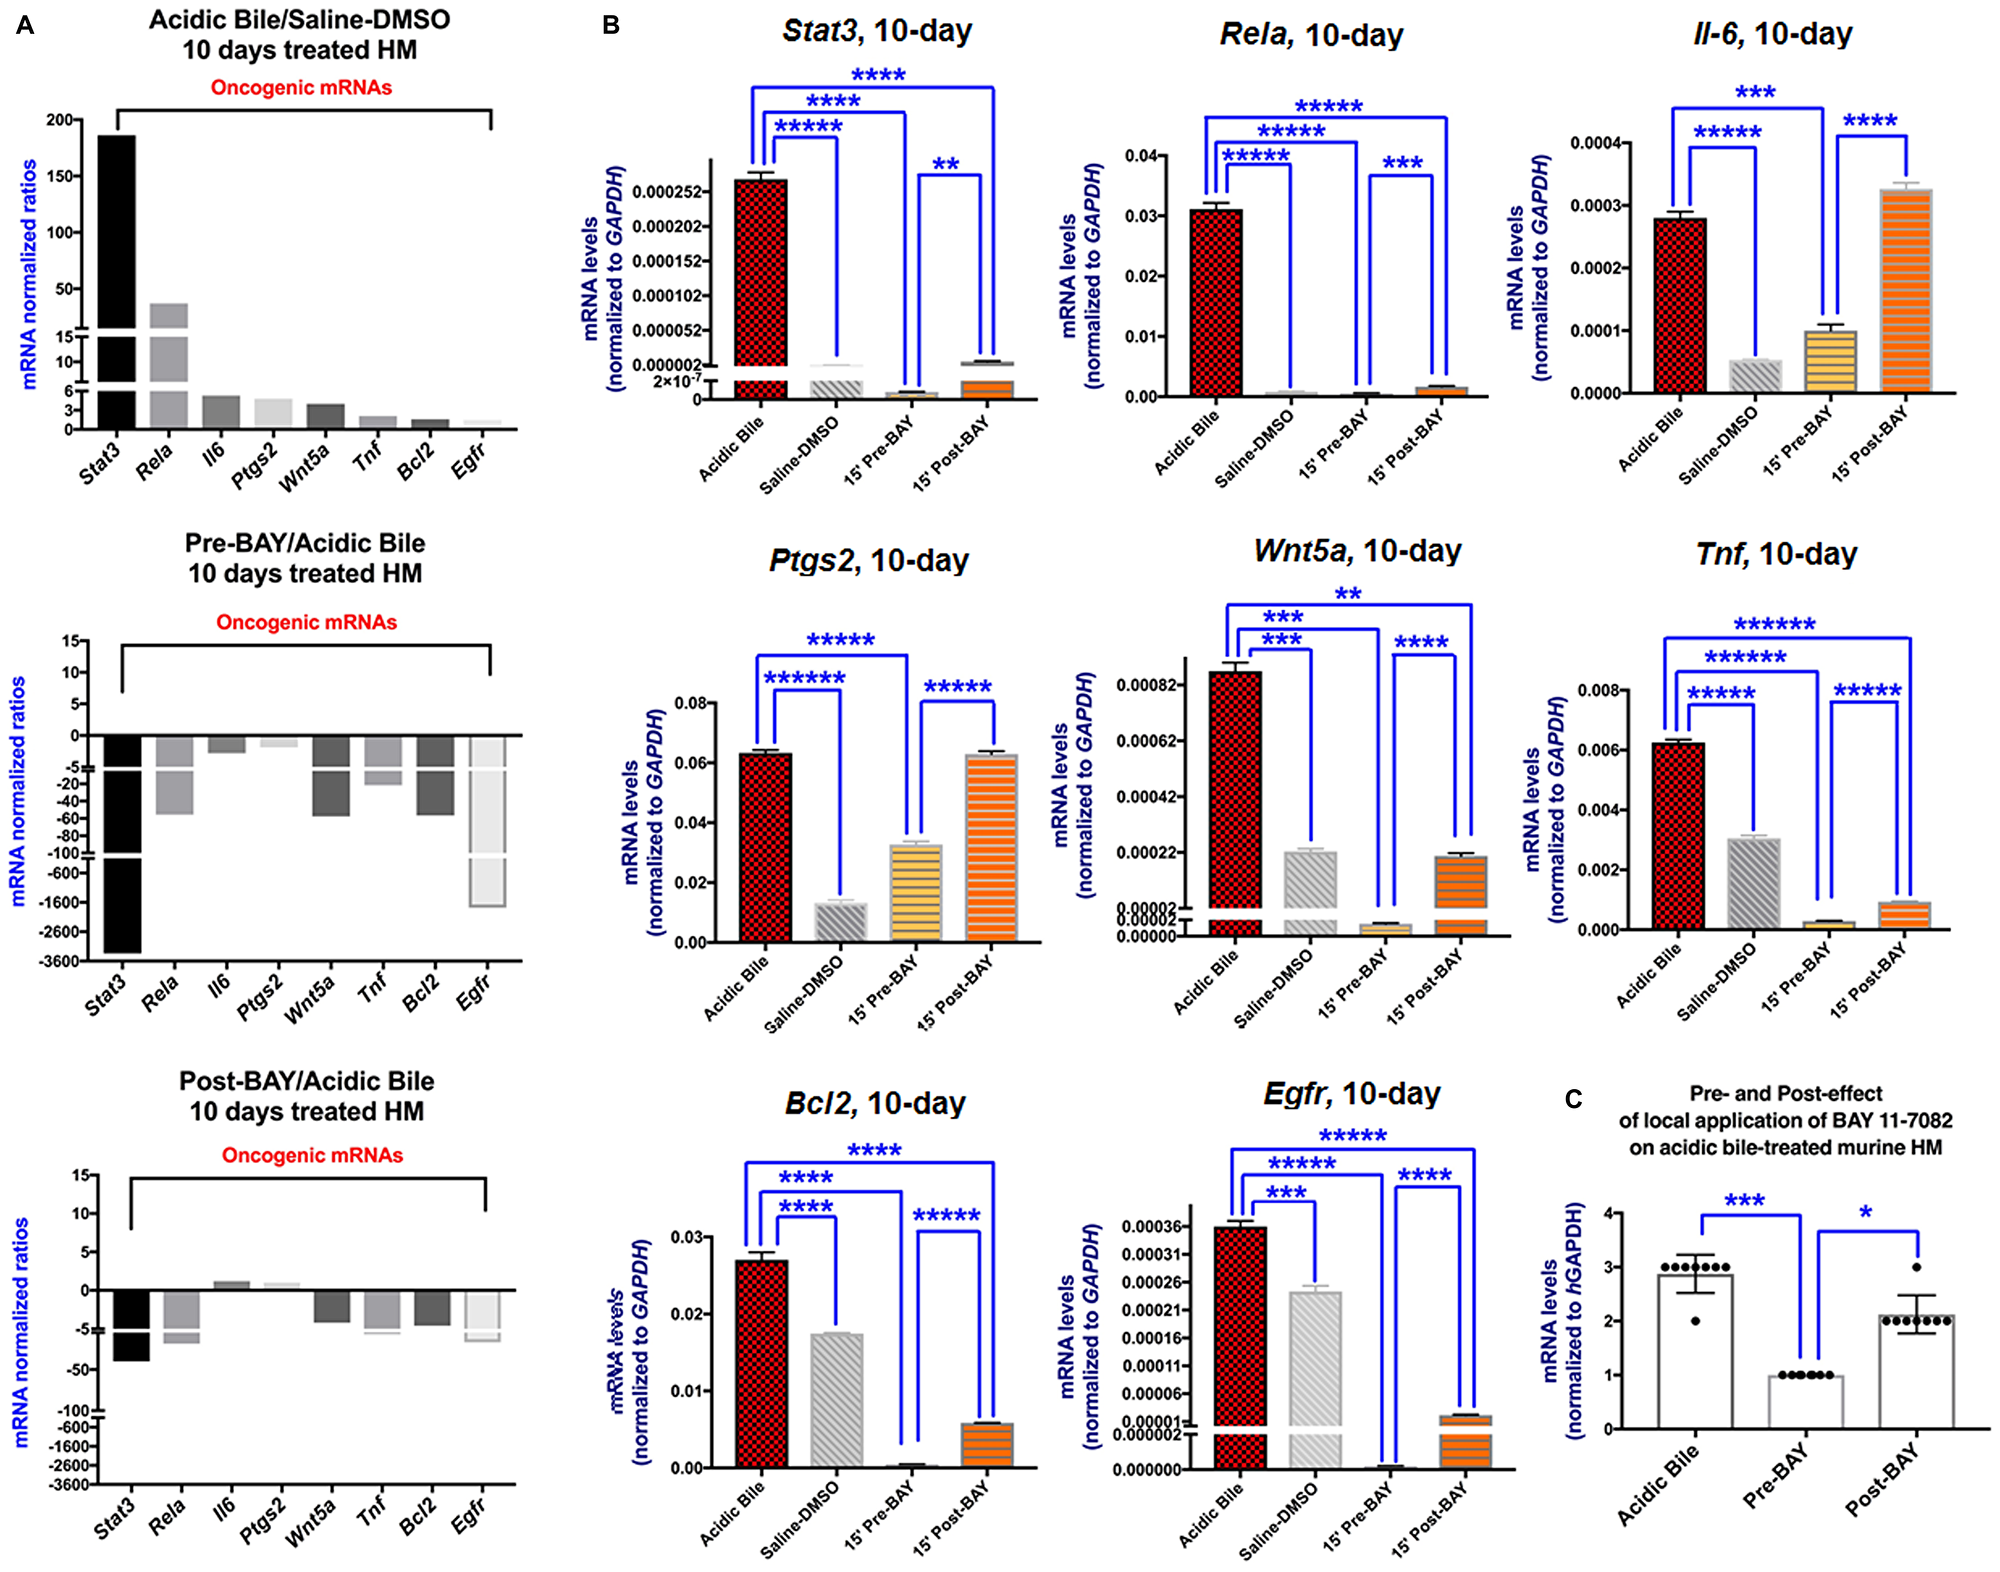 In vivo topical pre- or post-application of BAY 11-7082 prevents the acidic bile-induced transcriptional activation of NF-κB related genes with anti-apoptotic, cell proliferation, oncogenic or pro-inflammatory in 10-day exposed murine HM.